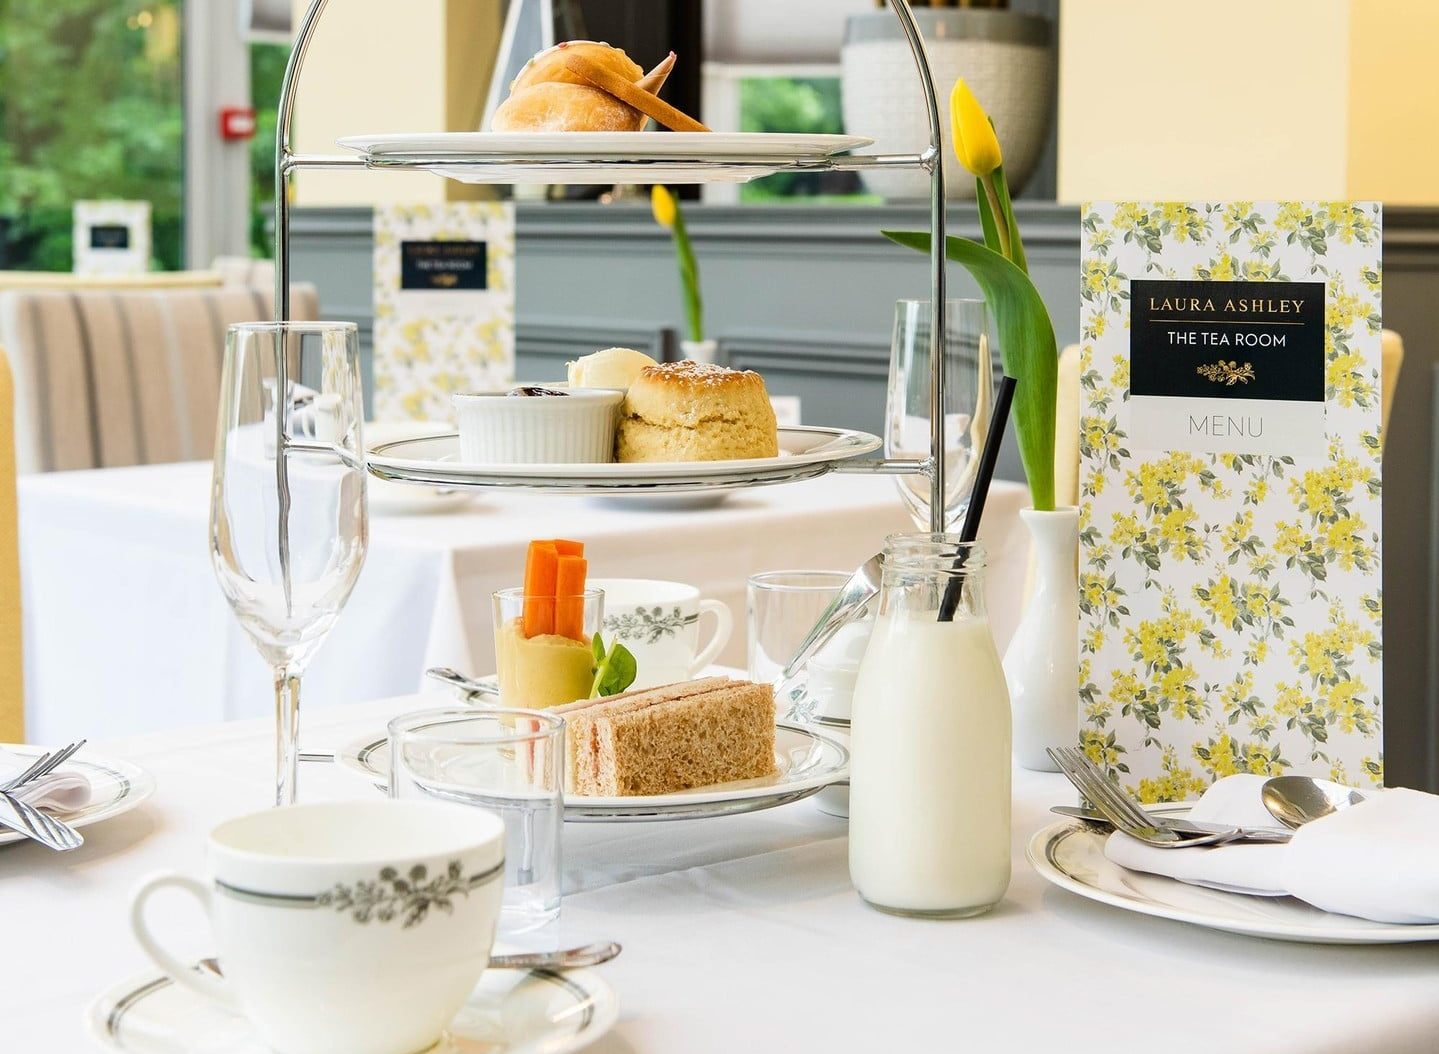 laura-ashley-tearoom-southcrest-manor-afternoon-tea-tier-with-scones-and-sandwiches